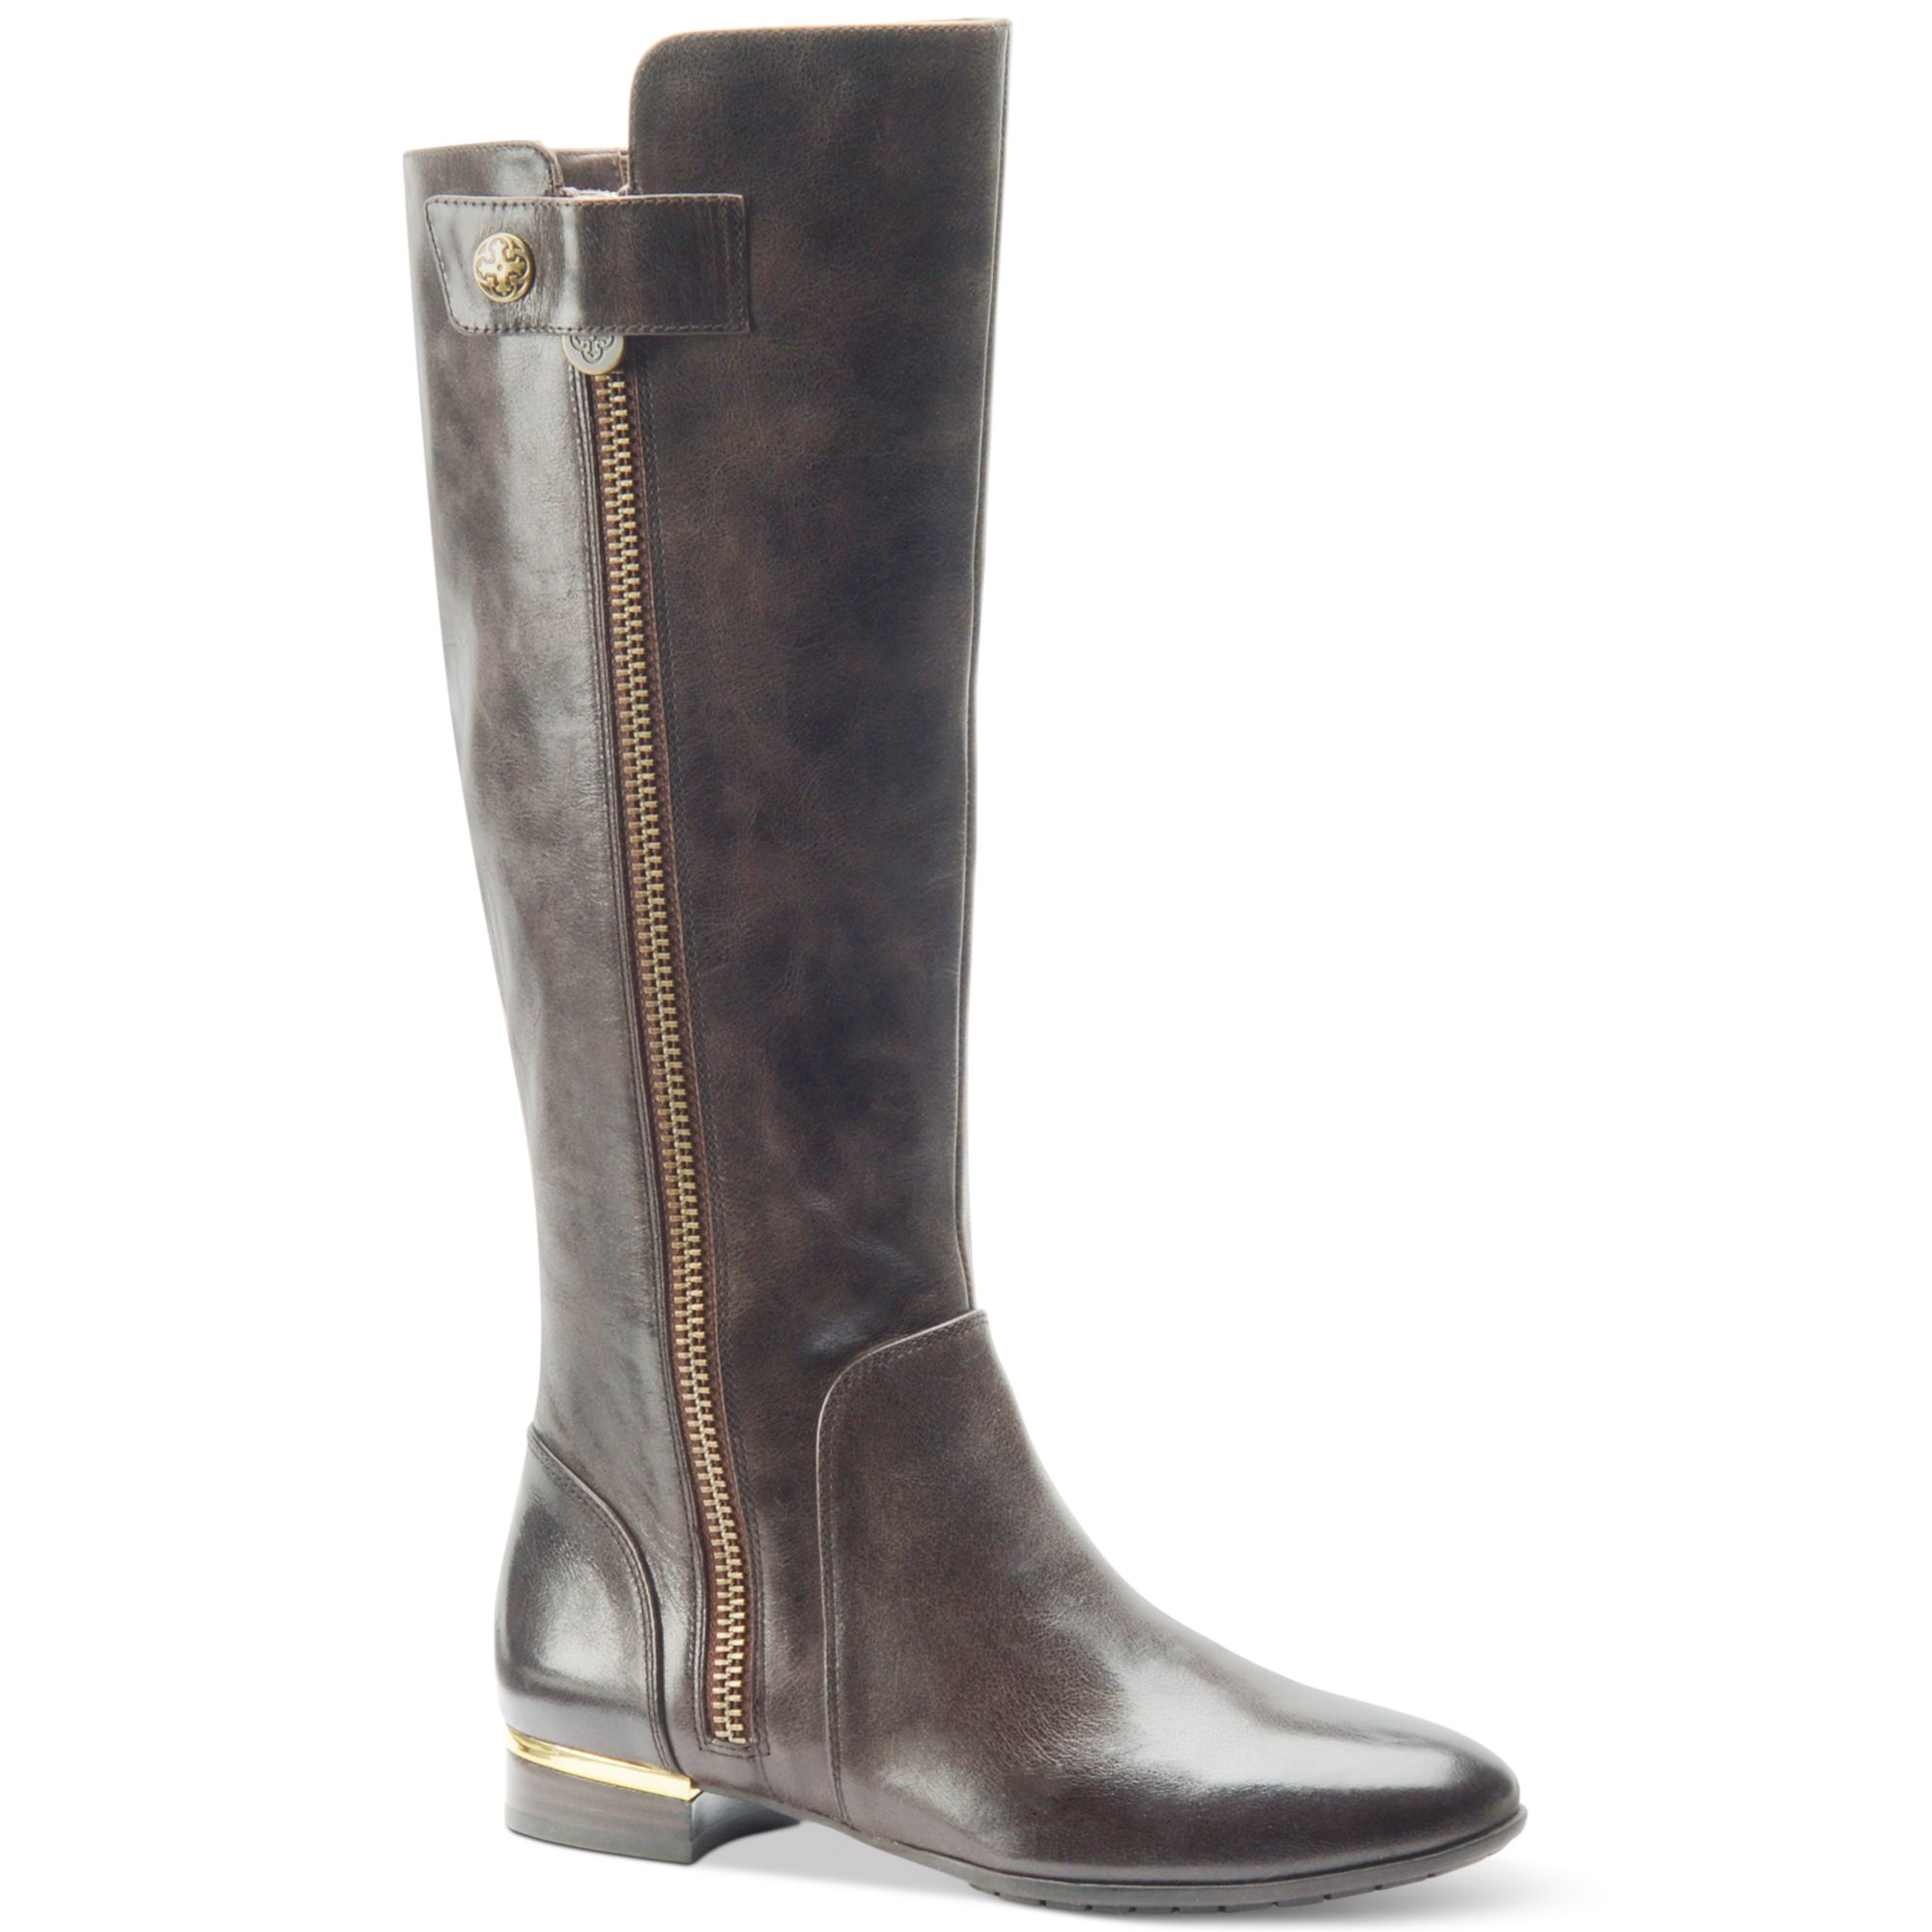 Isola Aali Boots in Brown - Lyst